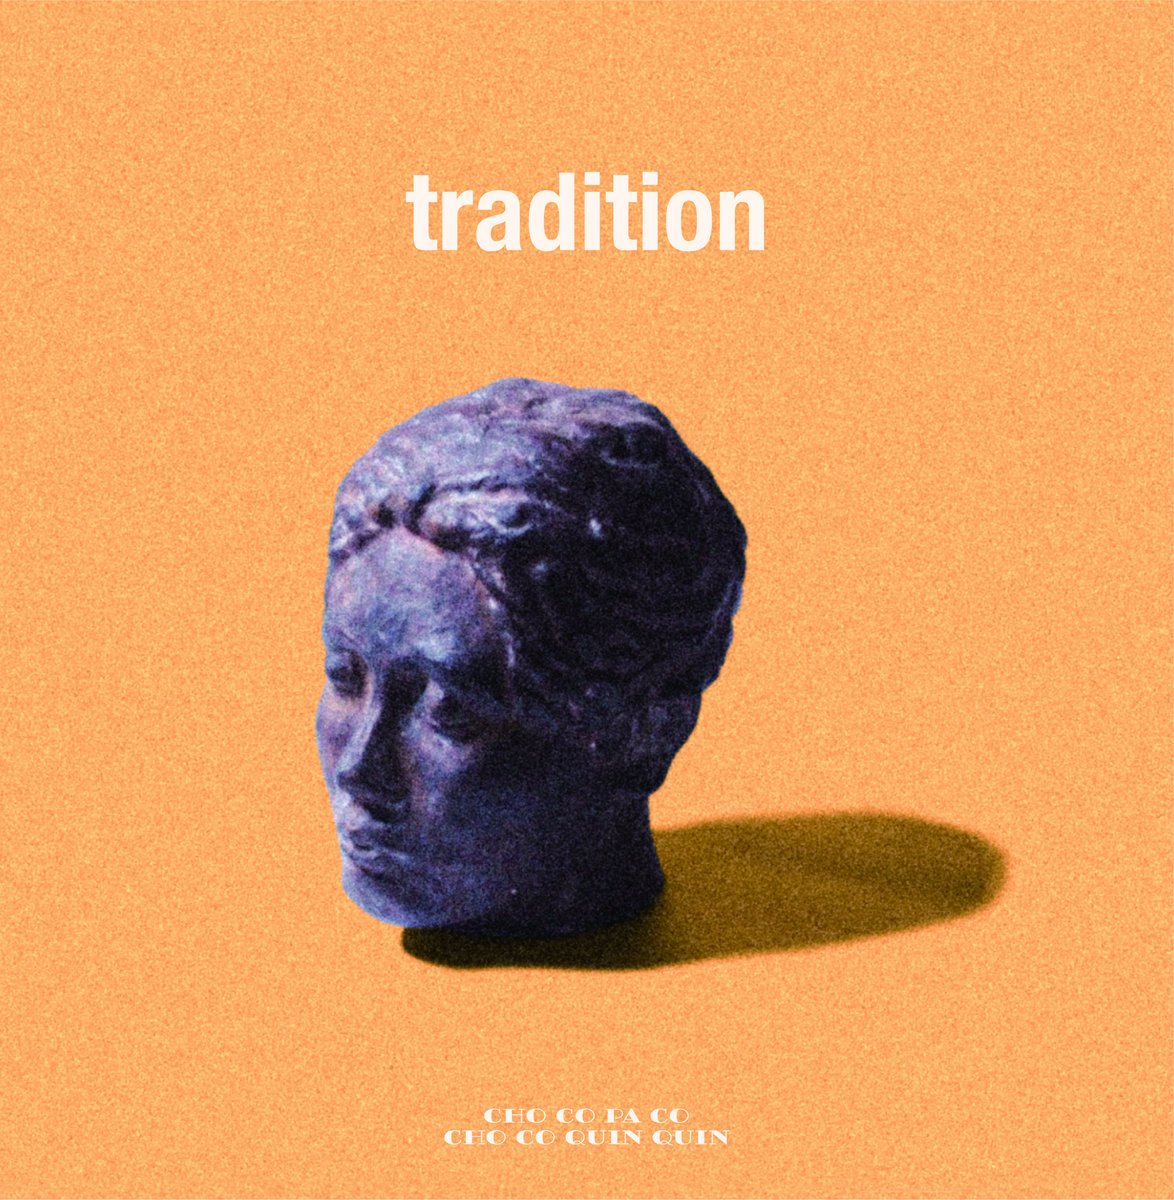 Album Review: Cho Co Pa Co Cho Co Quin Quin – tradition [Time 